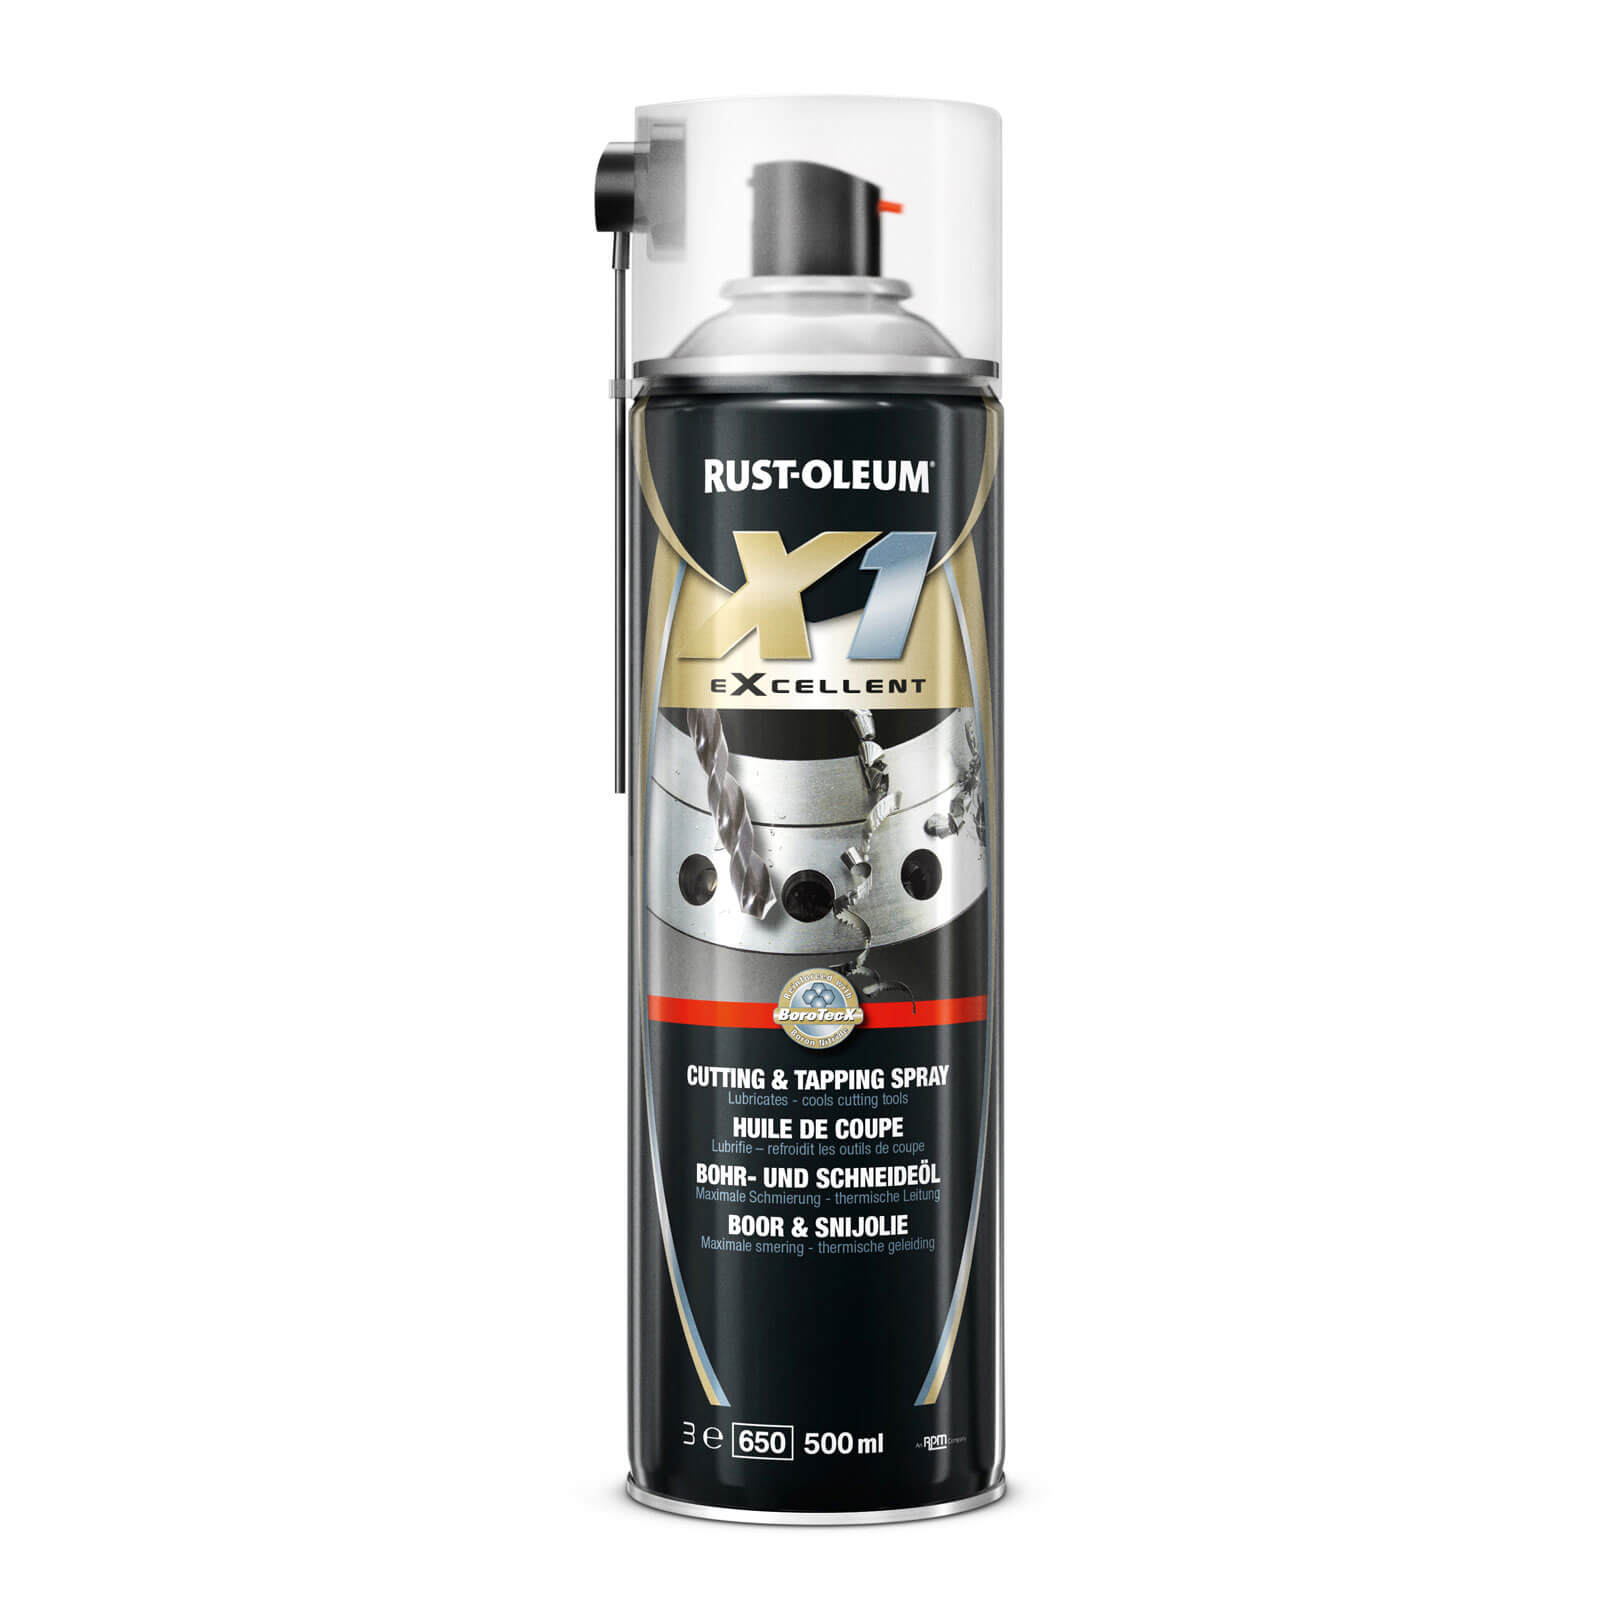 Image of Rust Oleum X1 eXcellent Cutting and Tapping Lubricating Spray 500ml